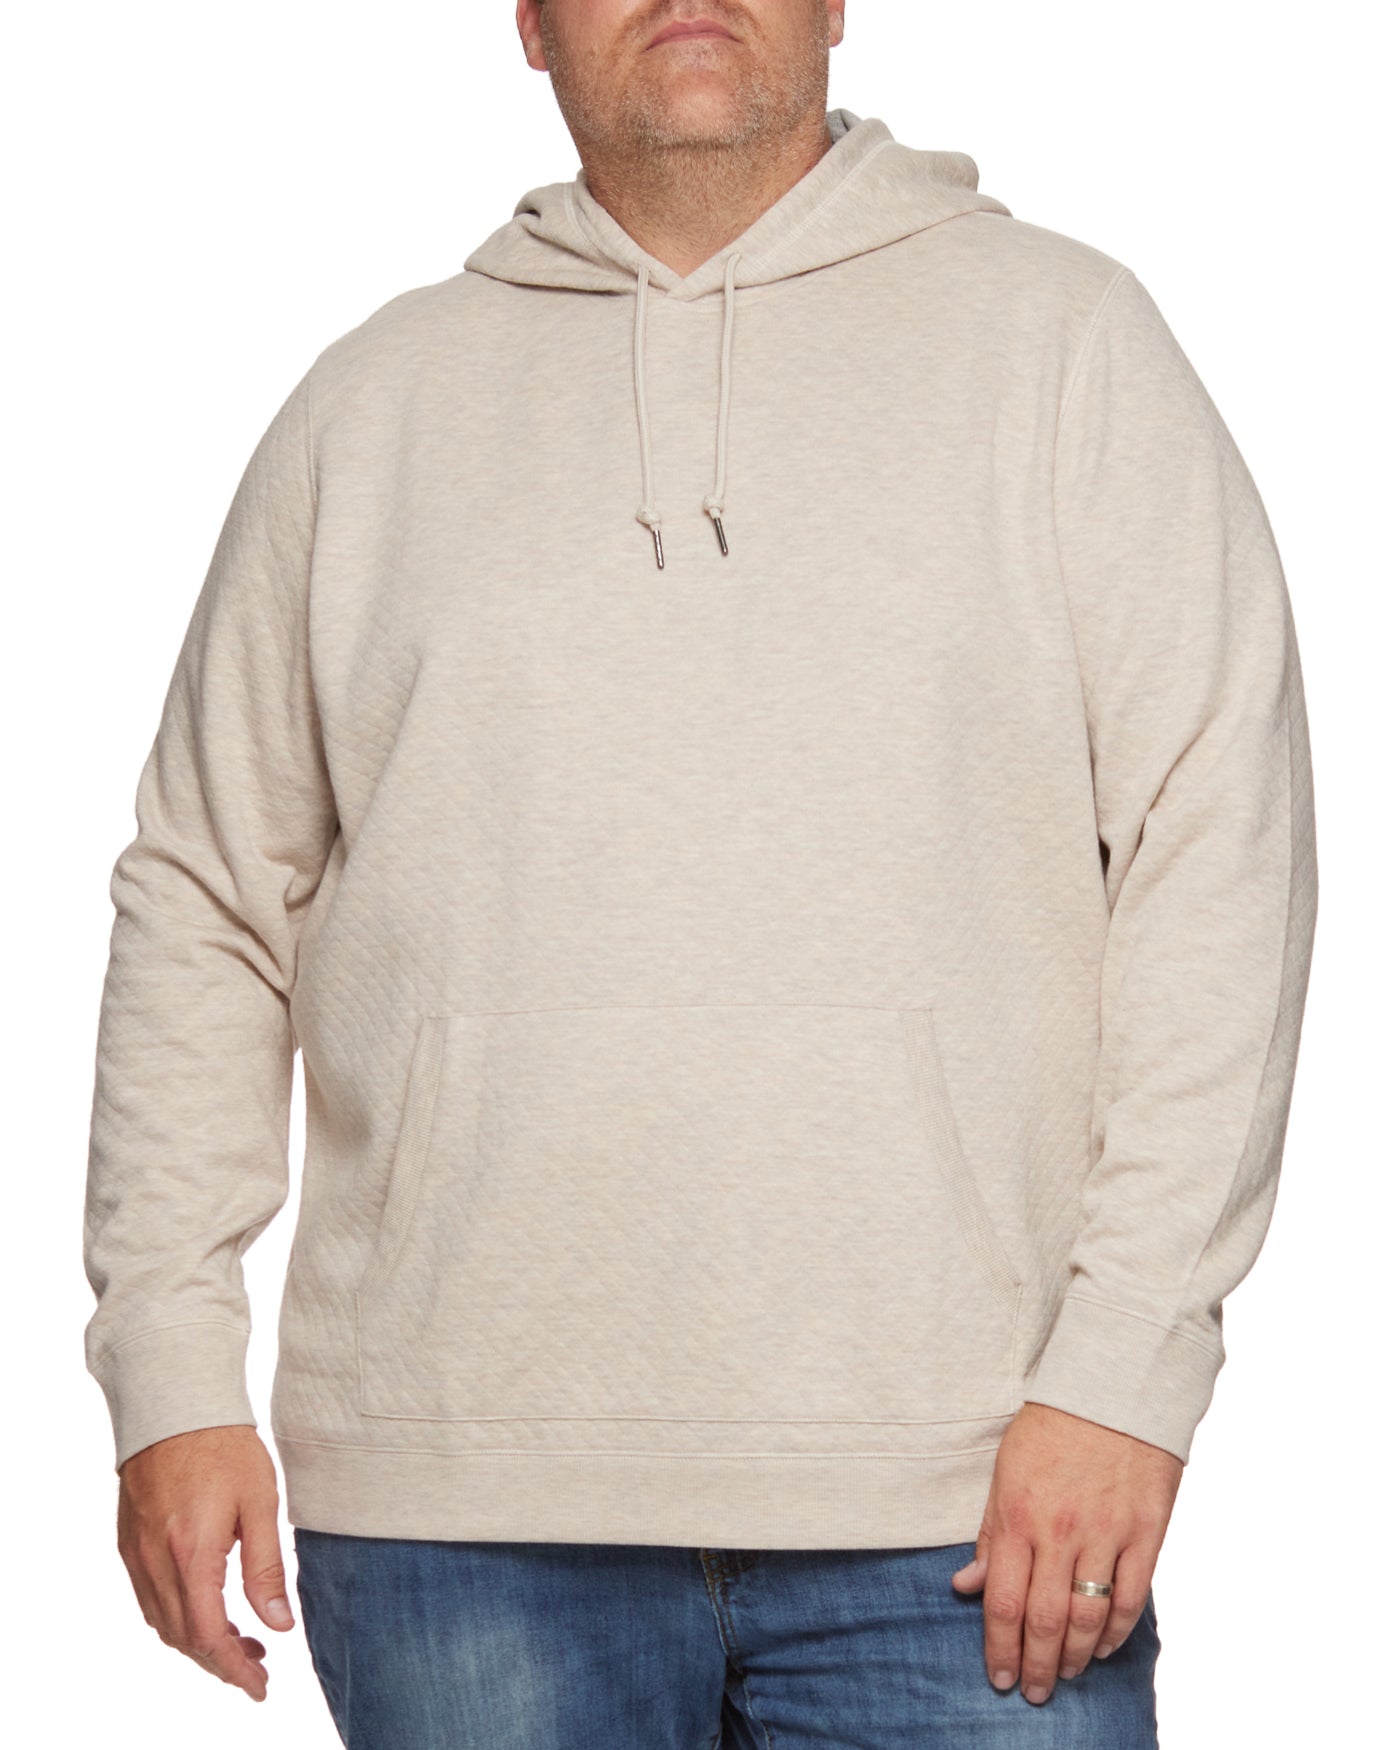 BRADNER SUPER-SOFT QUILTED HOODIE BIG & TALL